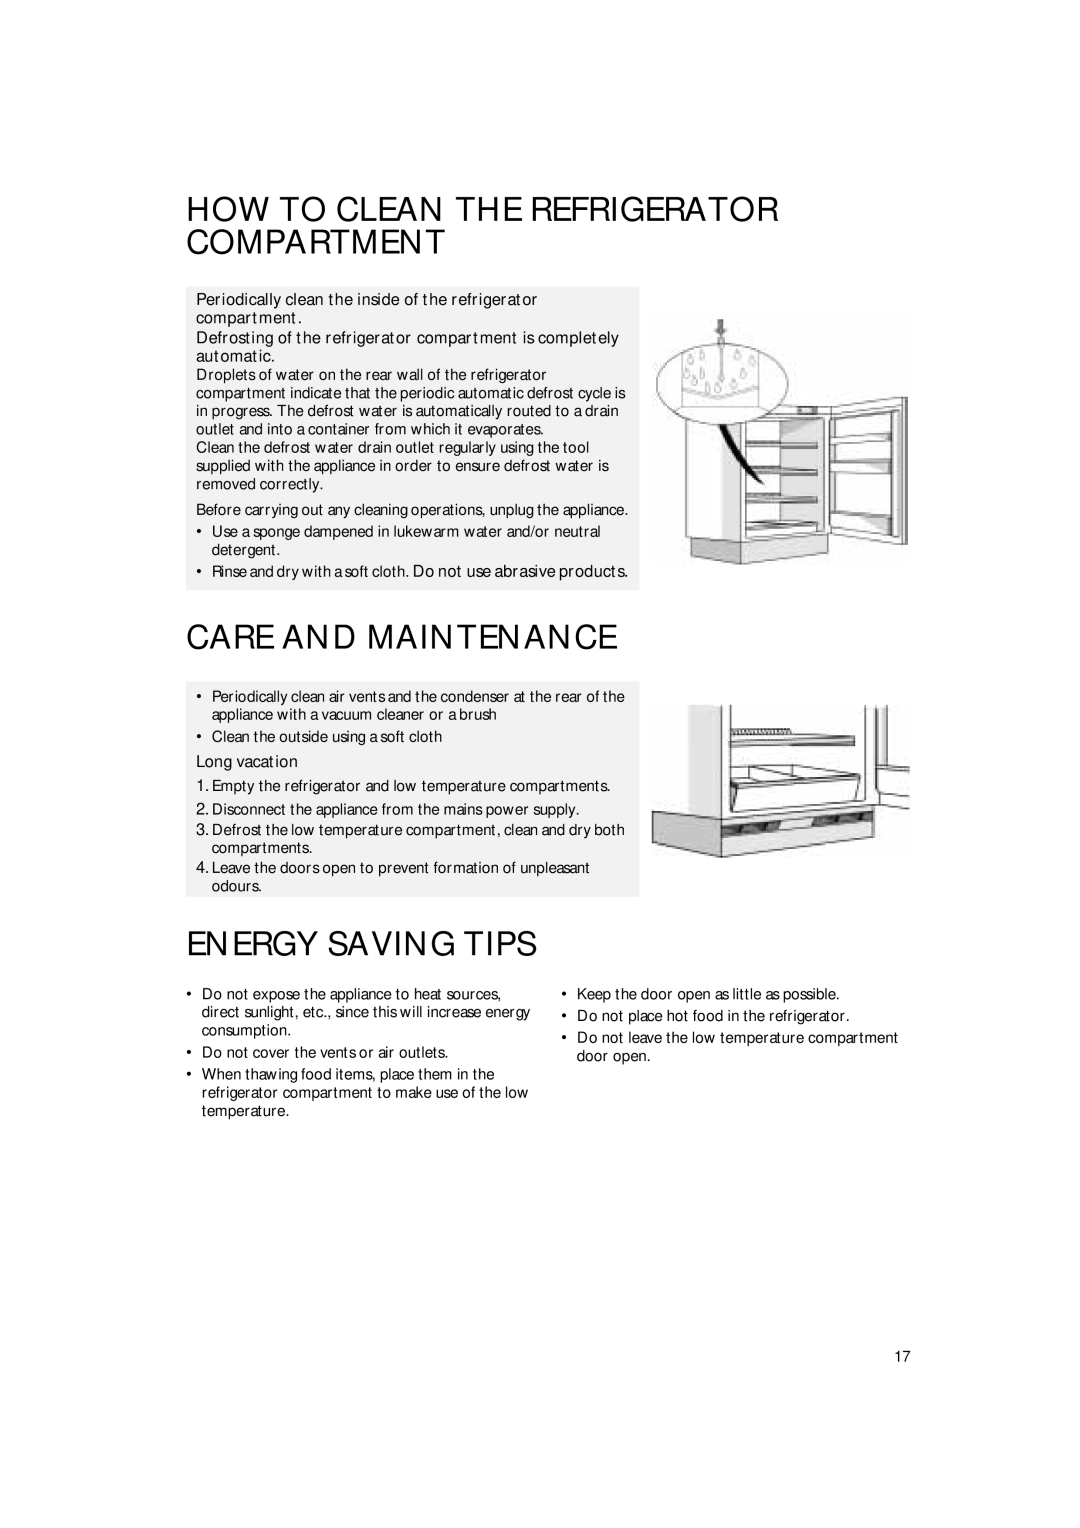 Smeg FR132A1 manual How To Clean The Refrigerator Compartment, Care And Maintenance, Energy Saving Tips, Long vacation 